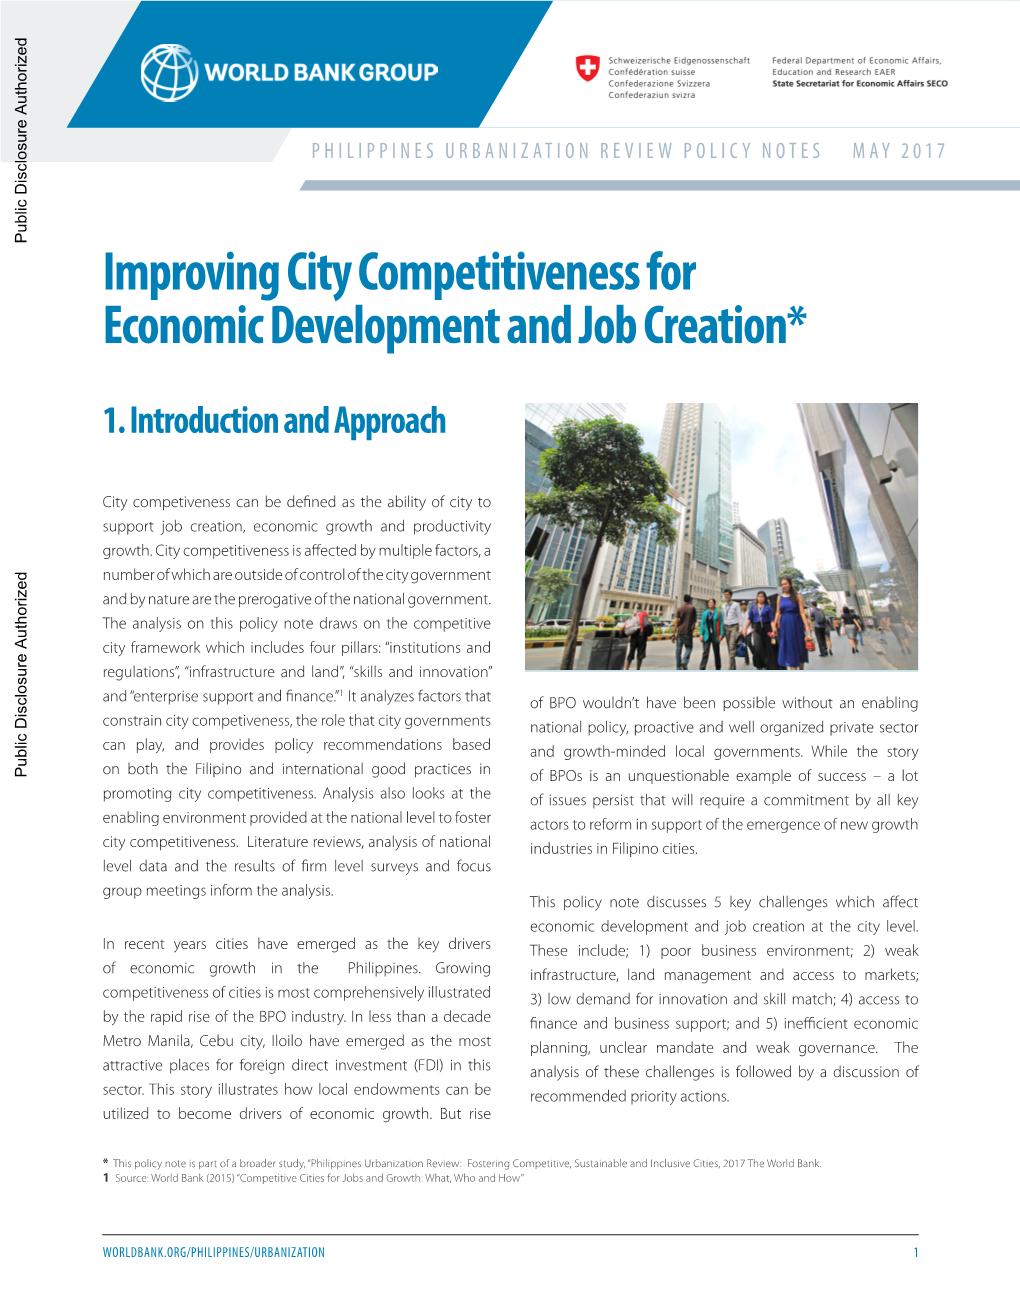 Improving City Competitiveness for Economic Development and Job Creation*